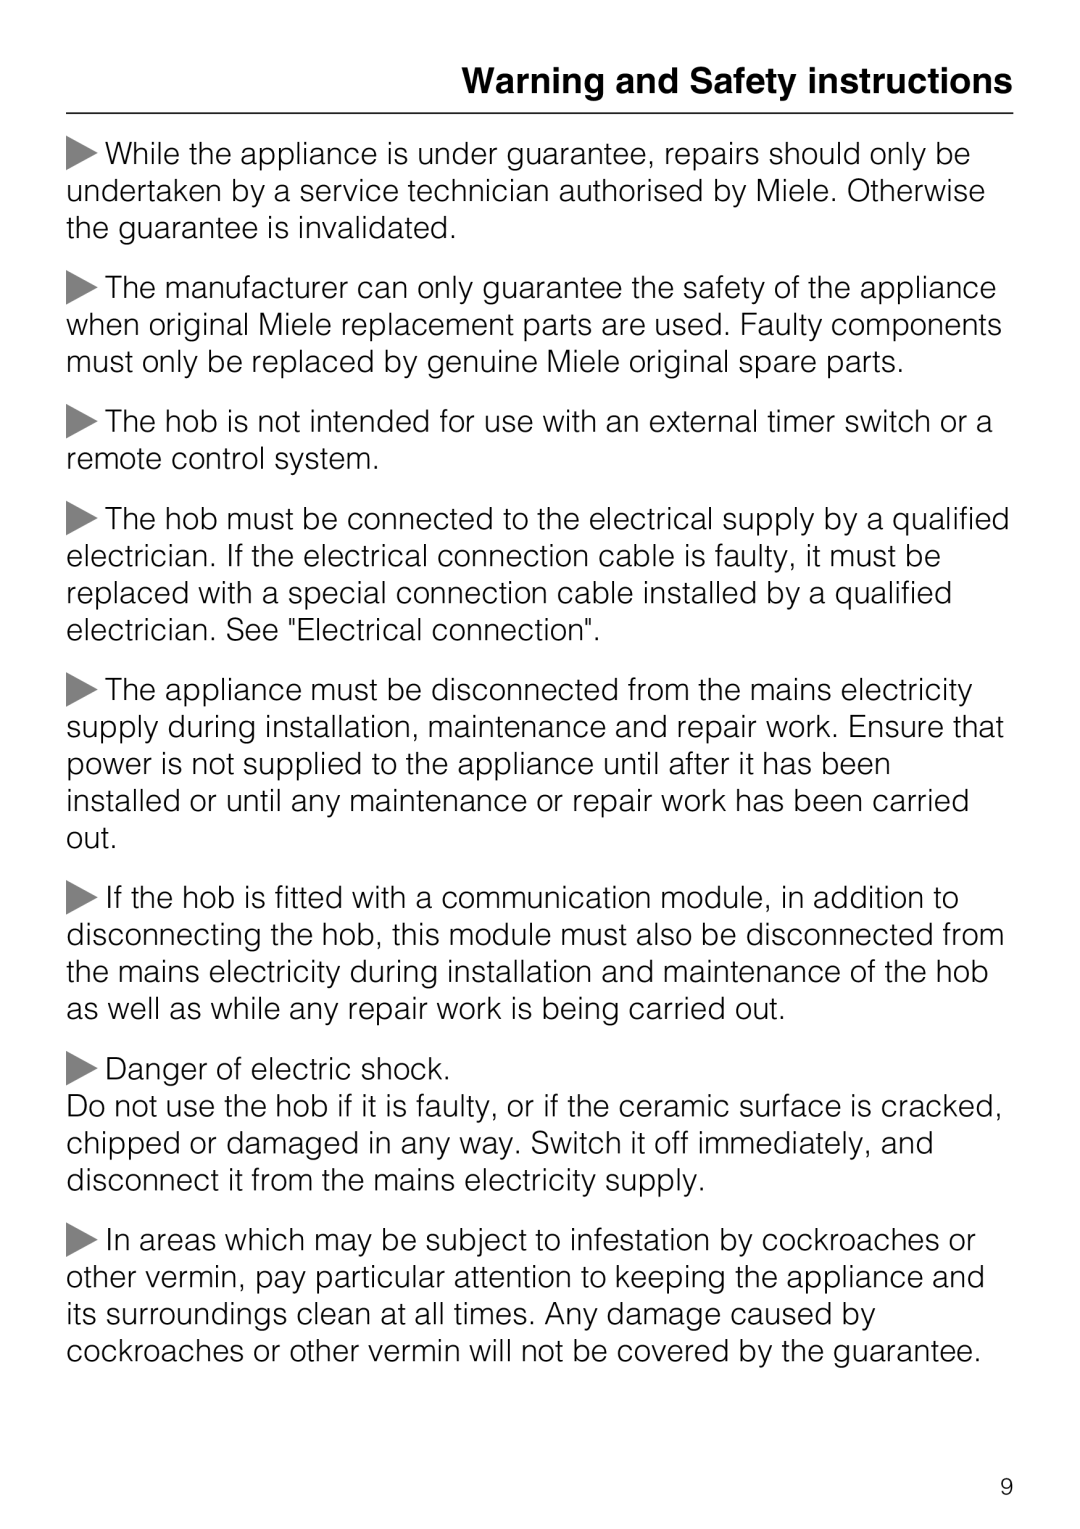 Miele KM6347, KM6323, KM6348, KM6322 installation instructions Warning and Safety instructions, Danger of electric shock 